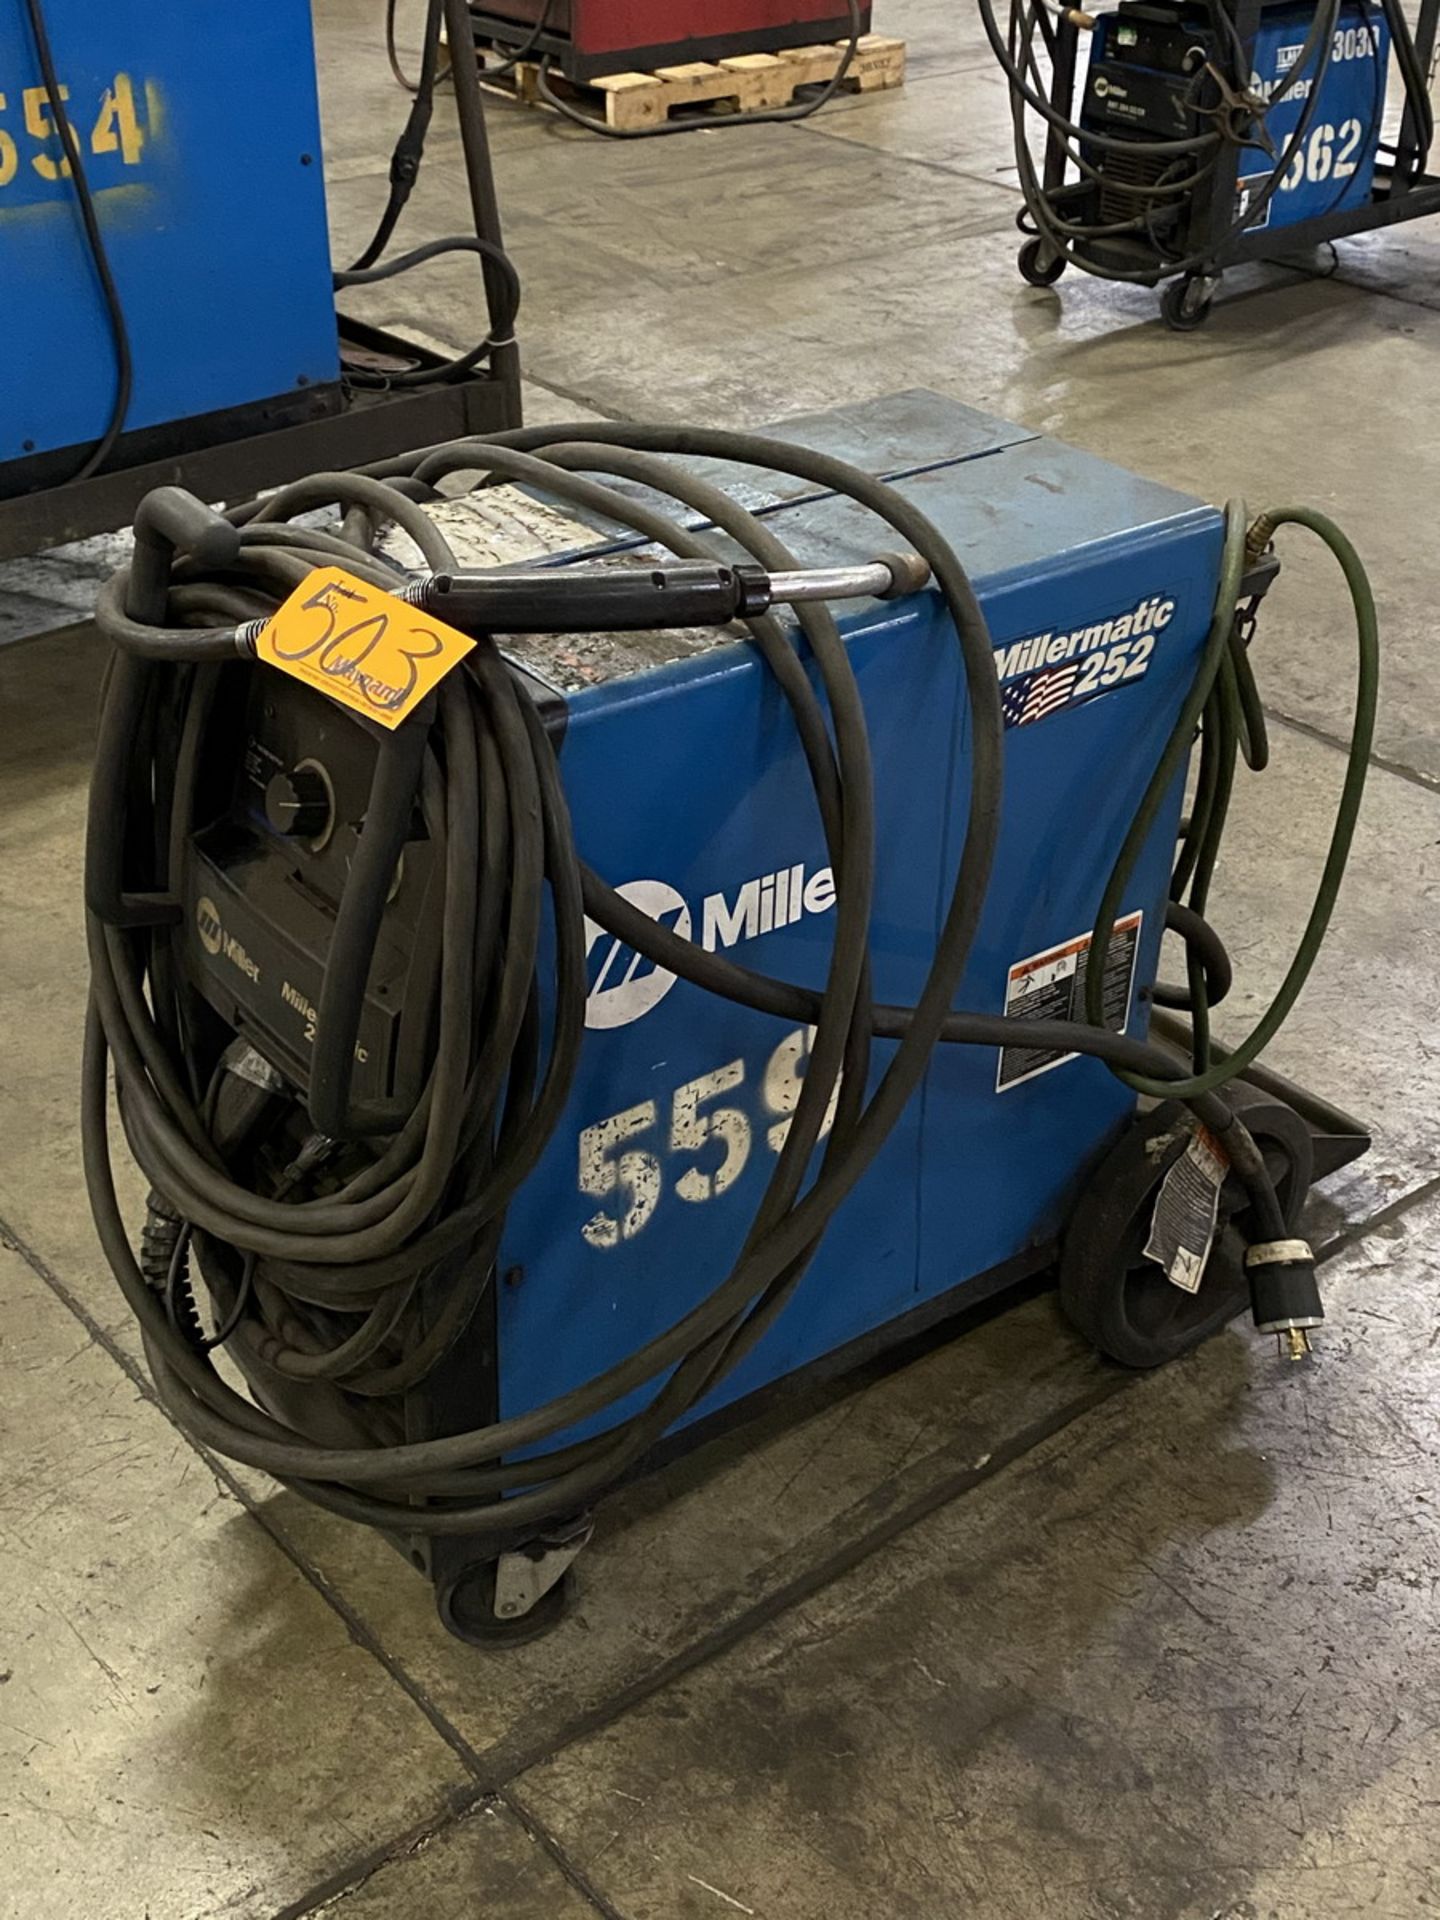 Miller Millermatic 252 Wire Welder Output: 28V, 200A, 60% Duty Cycle - Image 3 of 5